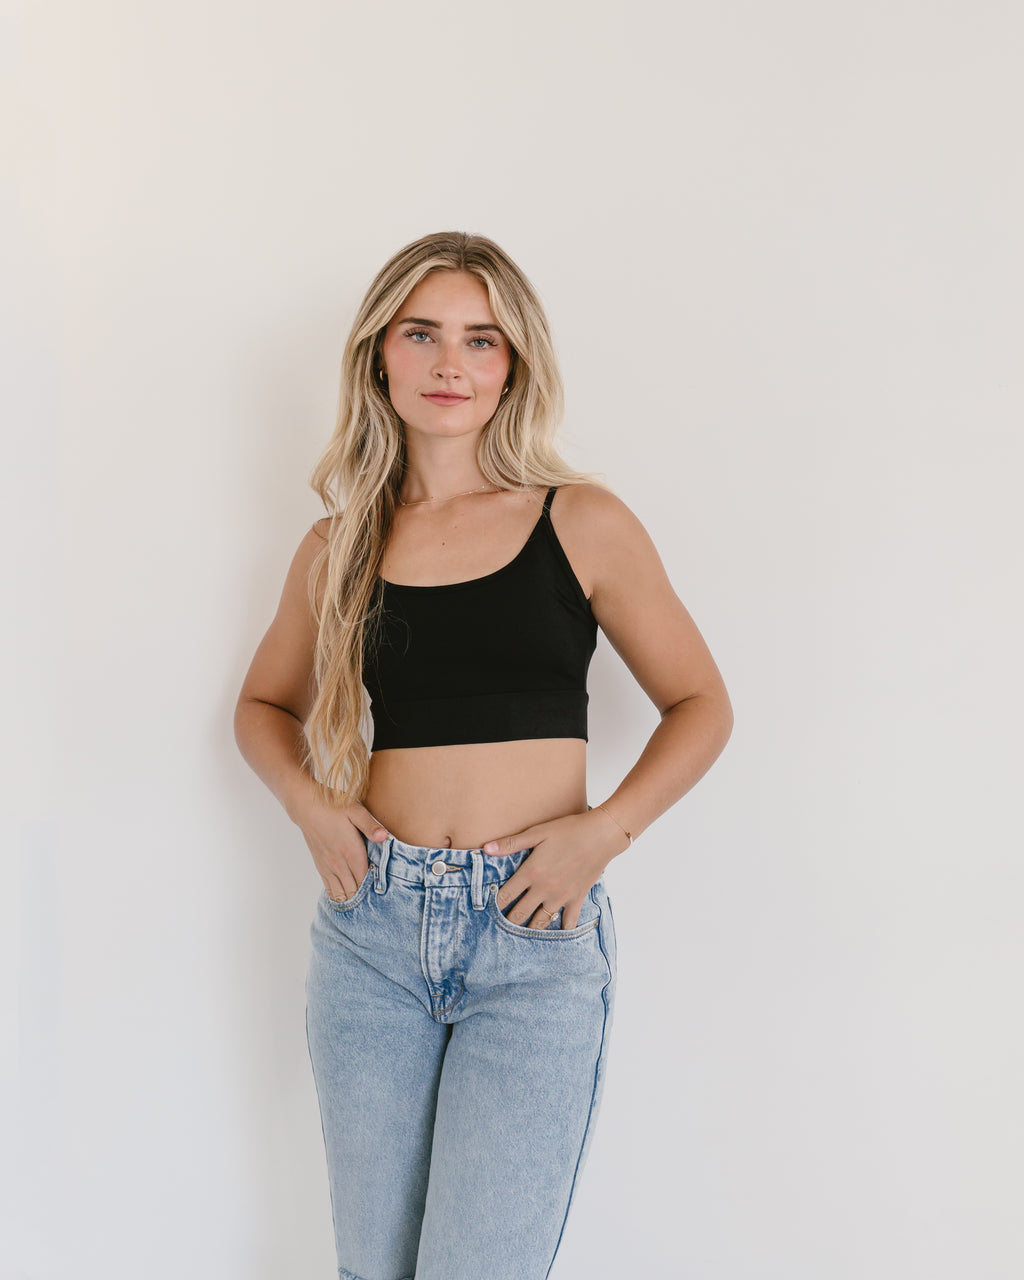 Woman in jeans and black crop top, wearing Spaghetti Strap Halftee.